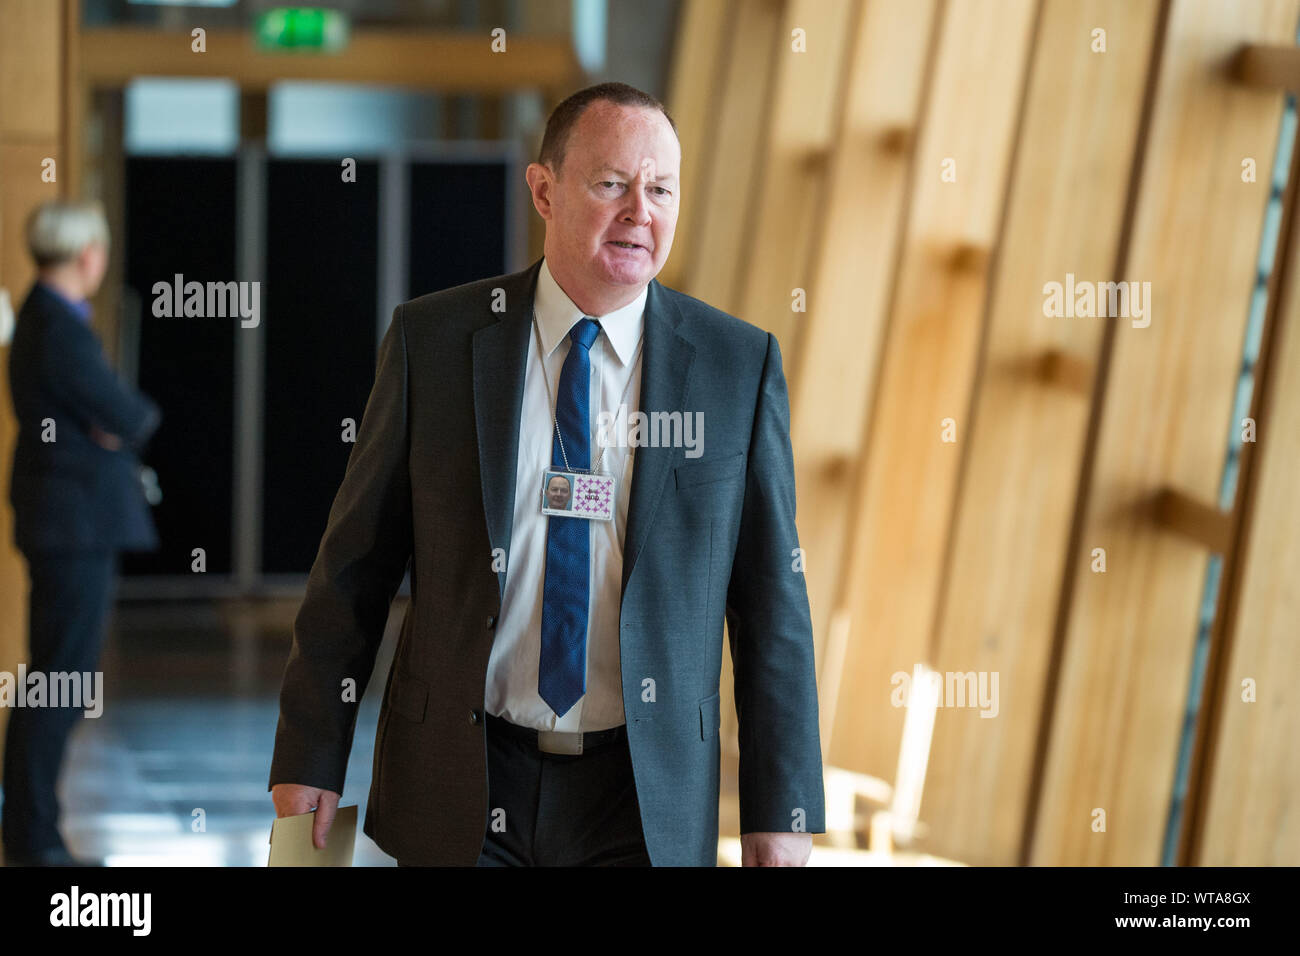 Edinburgh, UK. 5 September 2019. Pictured: Bill Kidd MSP - Glasgow Anniesland Constituency. Scenes from Holyrood before First Ministers Questions returns to the chamber after the summer recess.  Colin Fisher/CDFIMAGES.COM Stock Photo